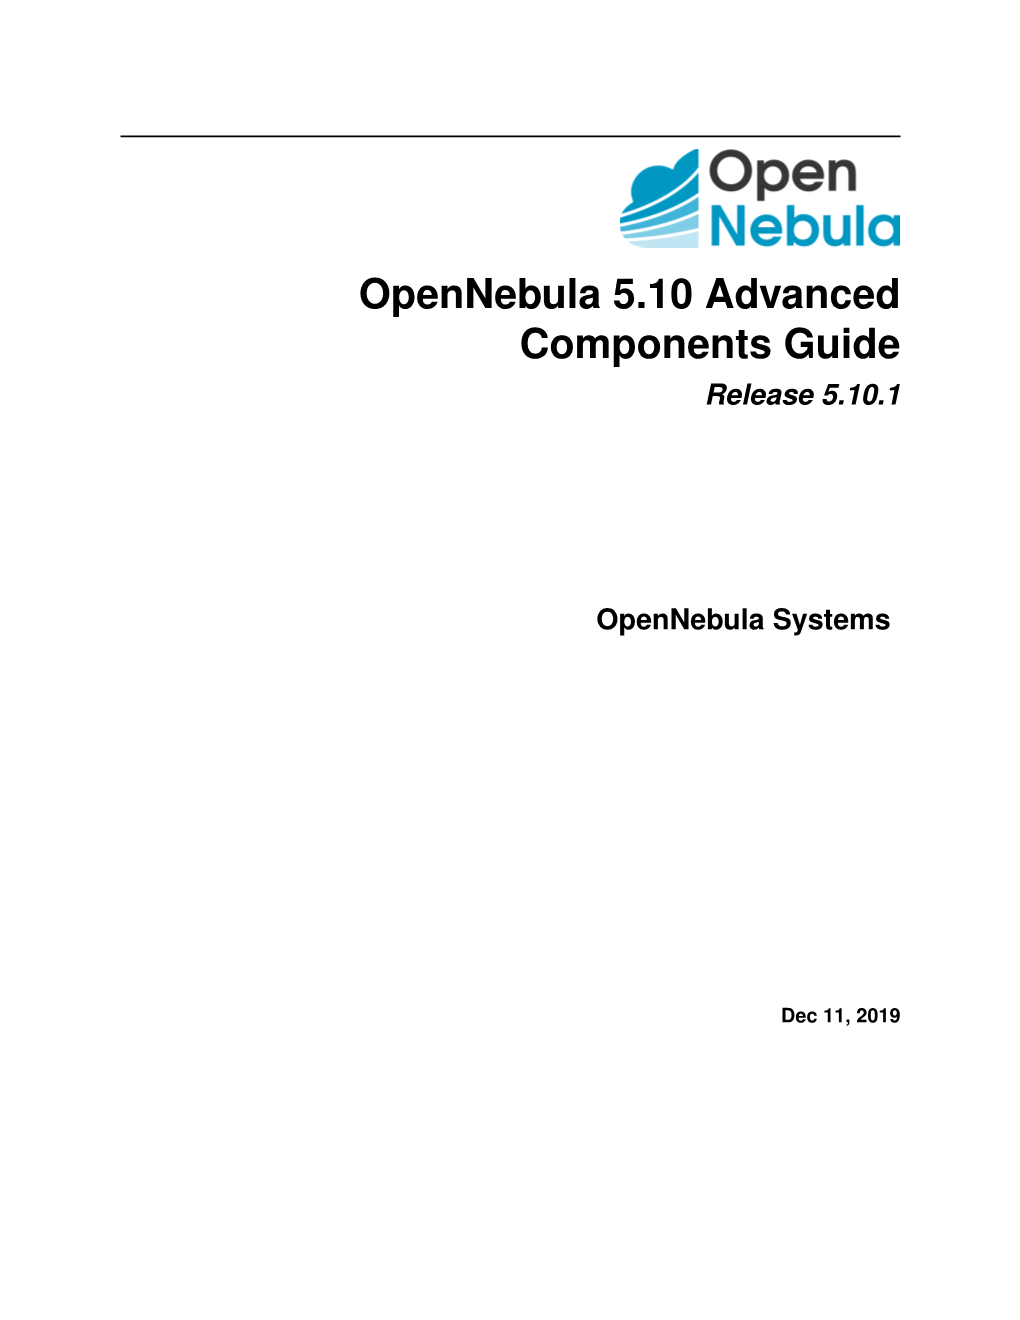 Opennebula 5.10 Advanced Components Guide Release 5.10.1